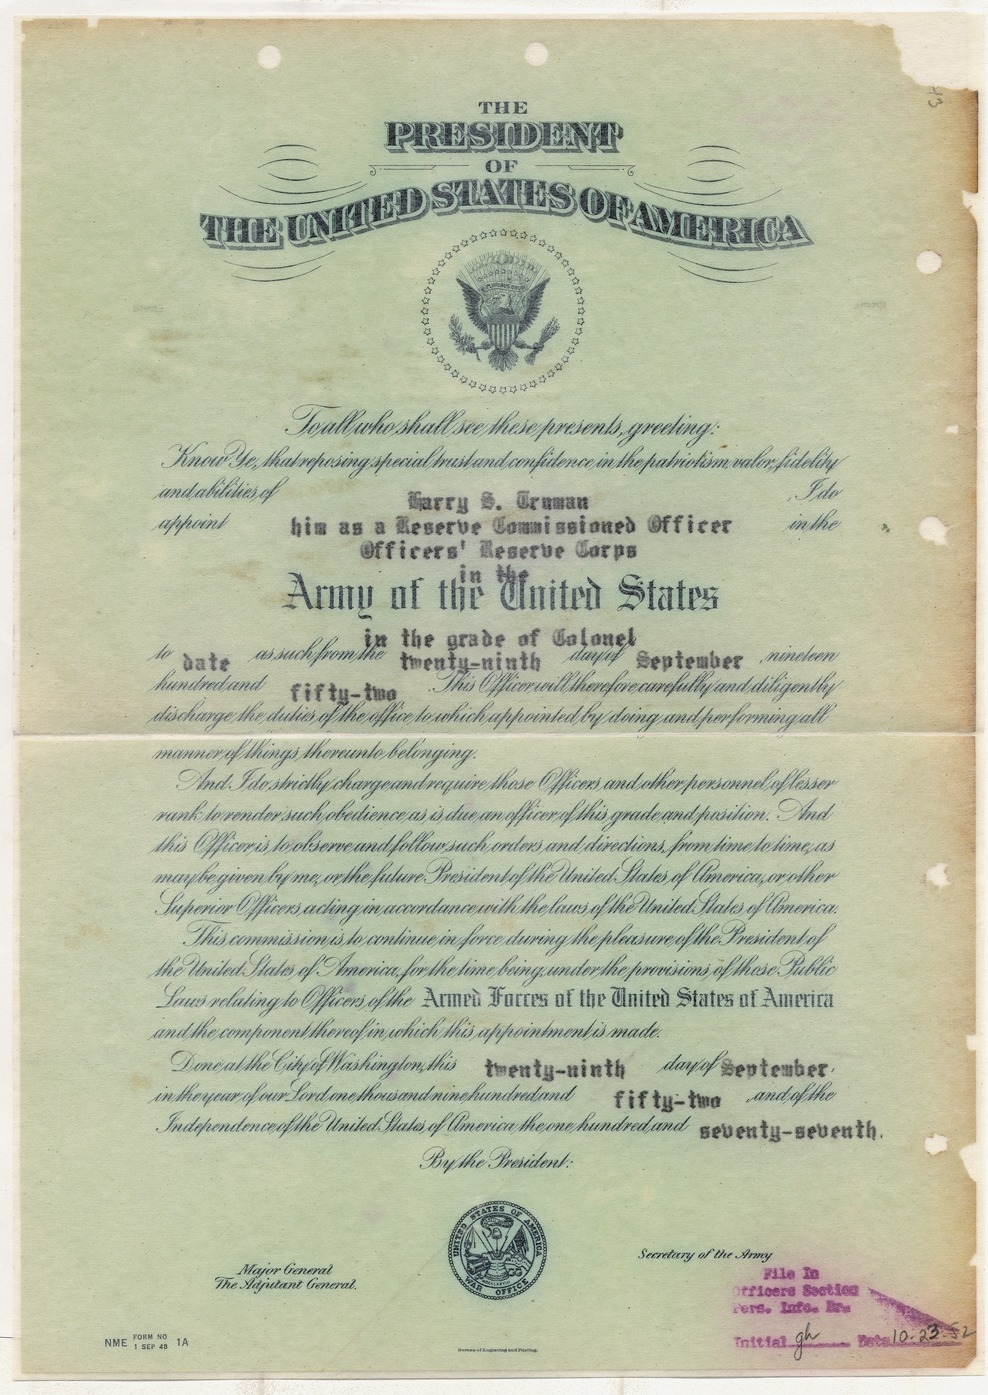 Certificate of Appointment as a Reserve Commissioned Officer in the Officers' Reserve Corps in the Army of the United States for Colonel Harry S. Truman